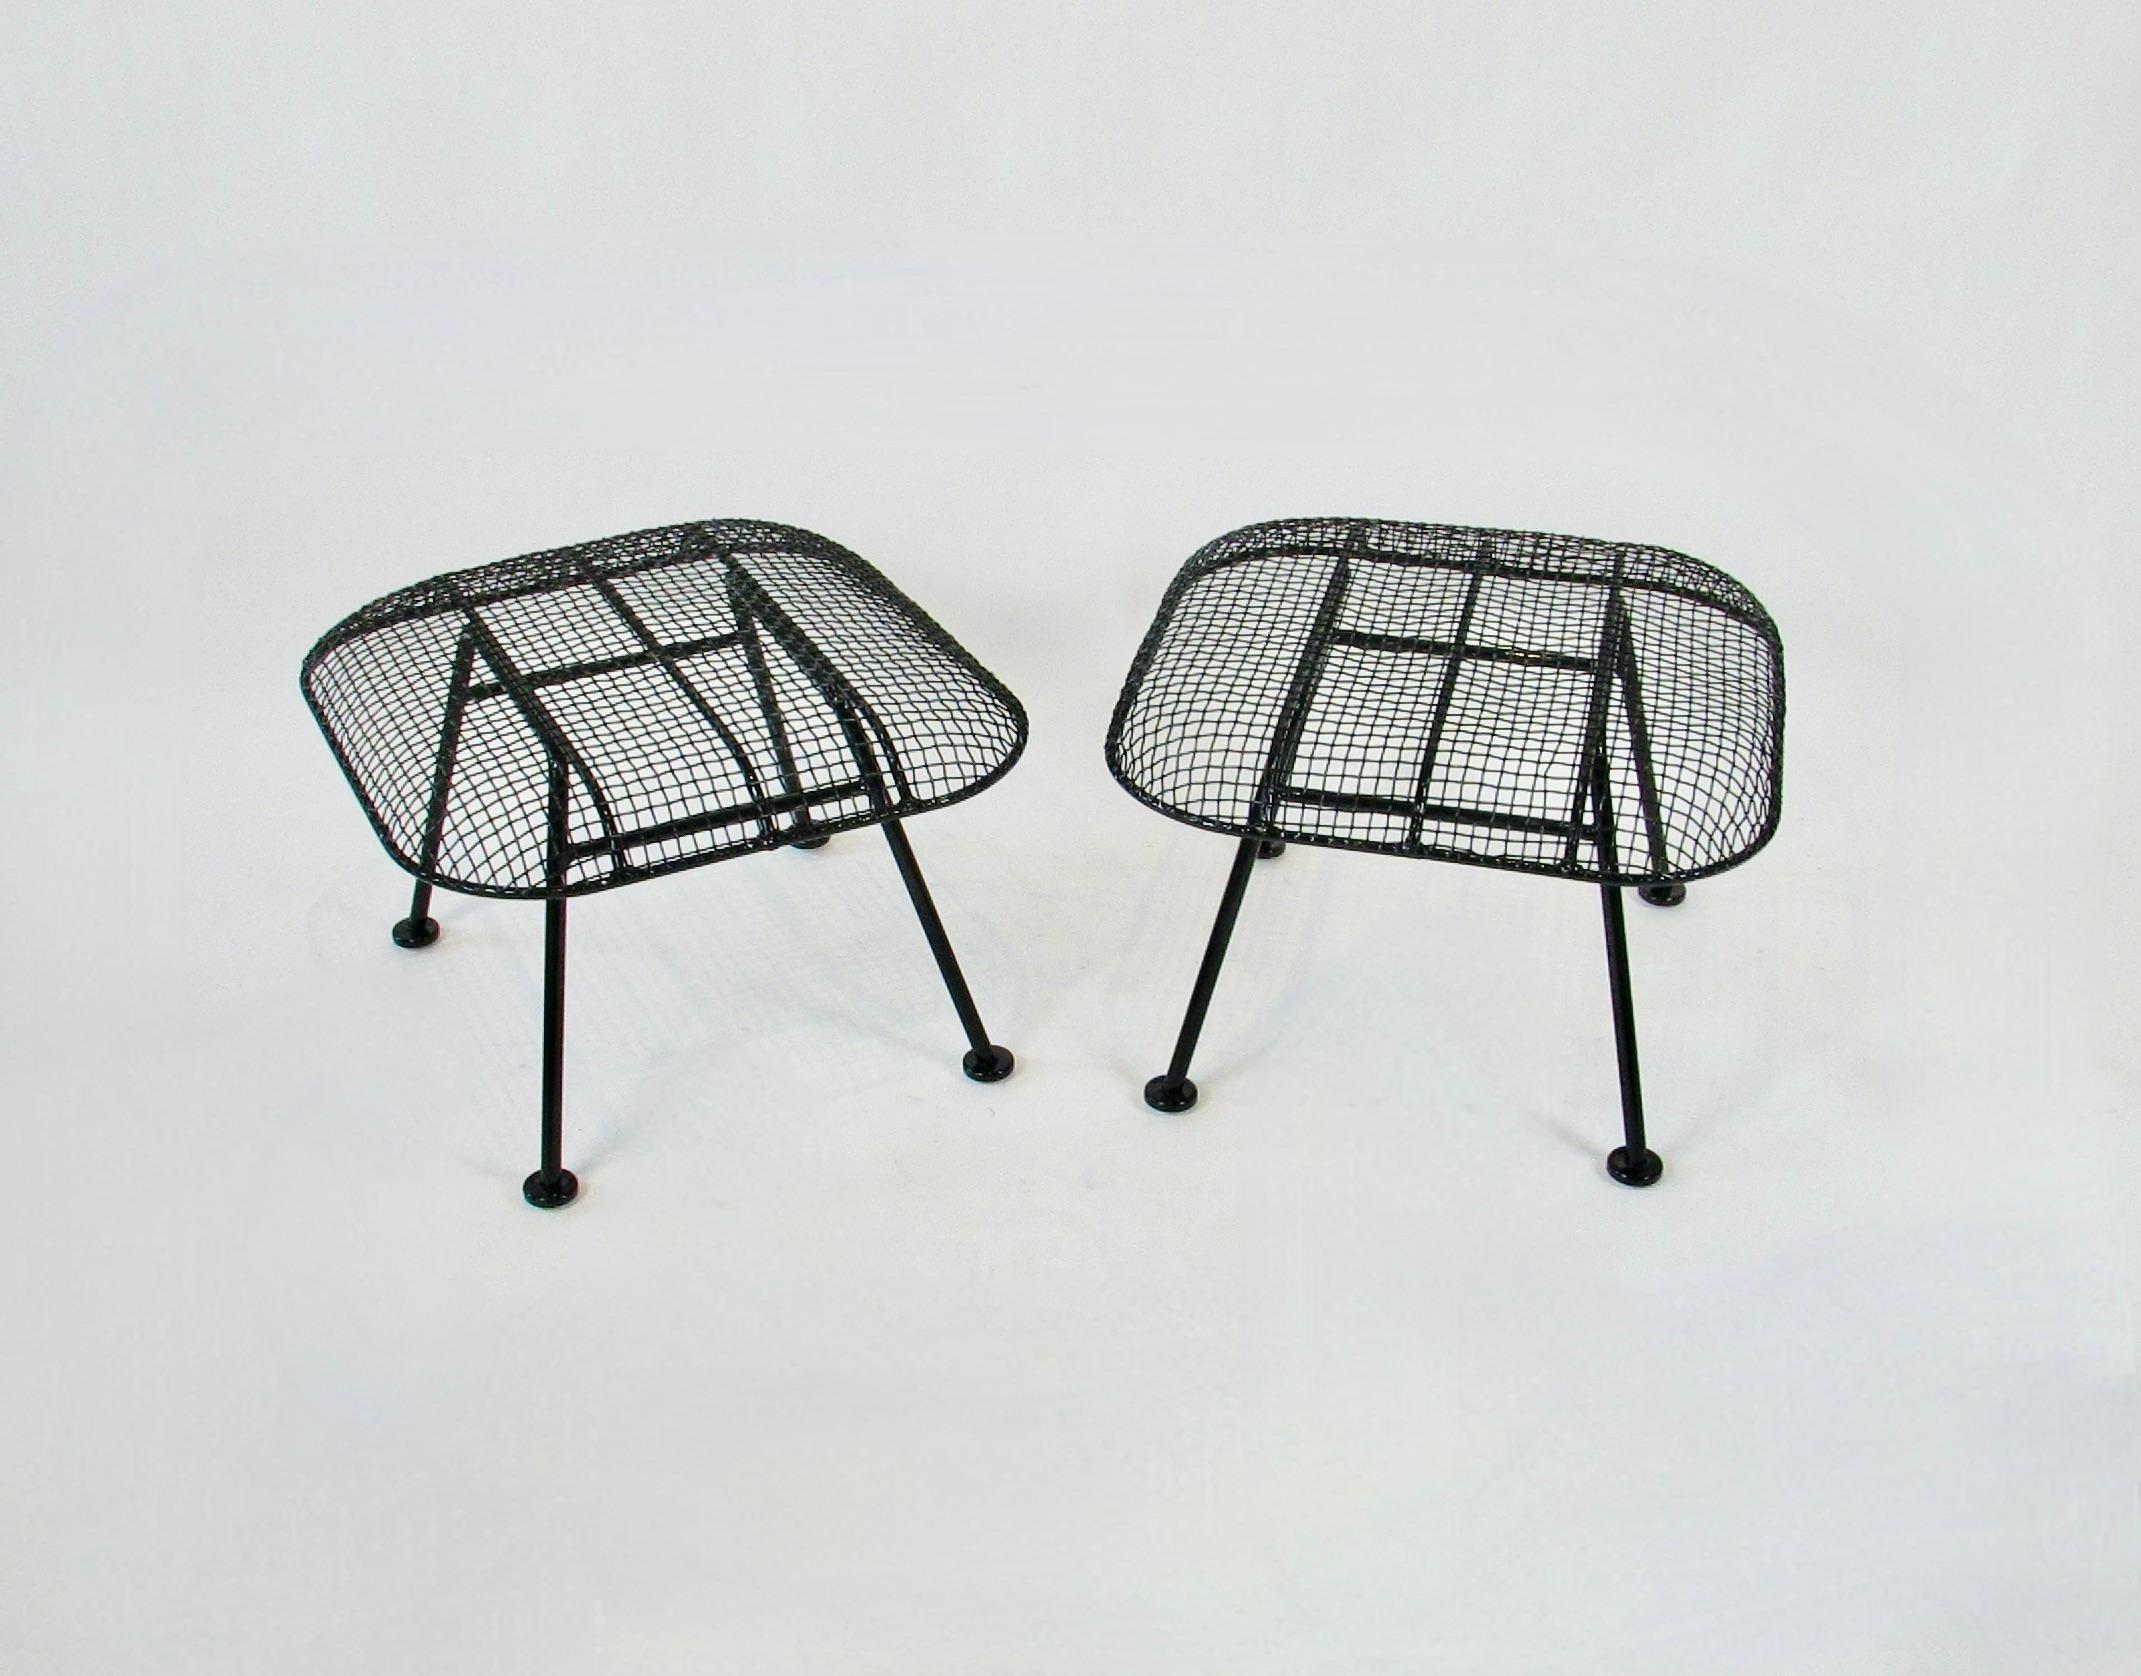 Pair of Woodard steel mesh over wrought iron ottomans. Part of the Woodard Sculpture series. Designed to work with the large Woodard lounge chairs as ottomans stools or side tables. Beautifully restored in gloss black powder coat. New glides added